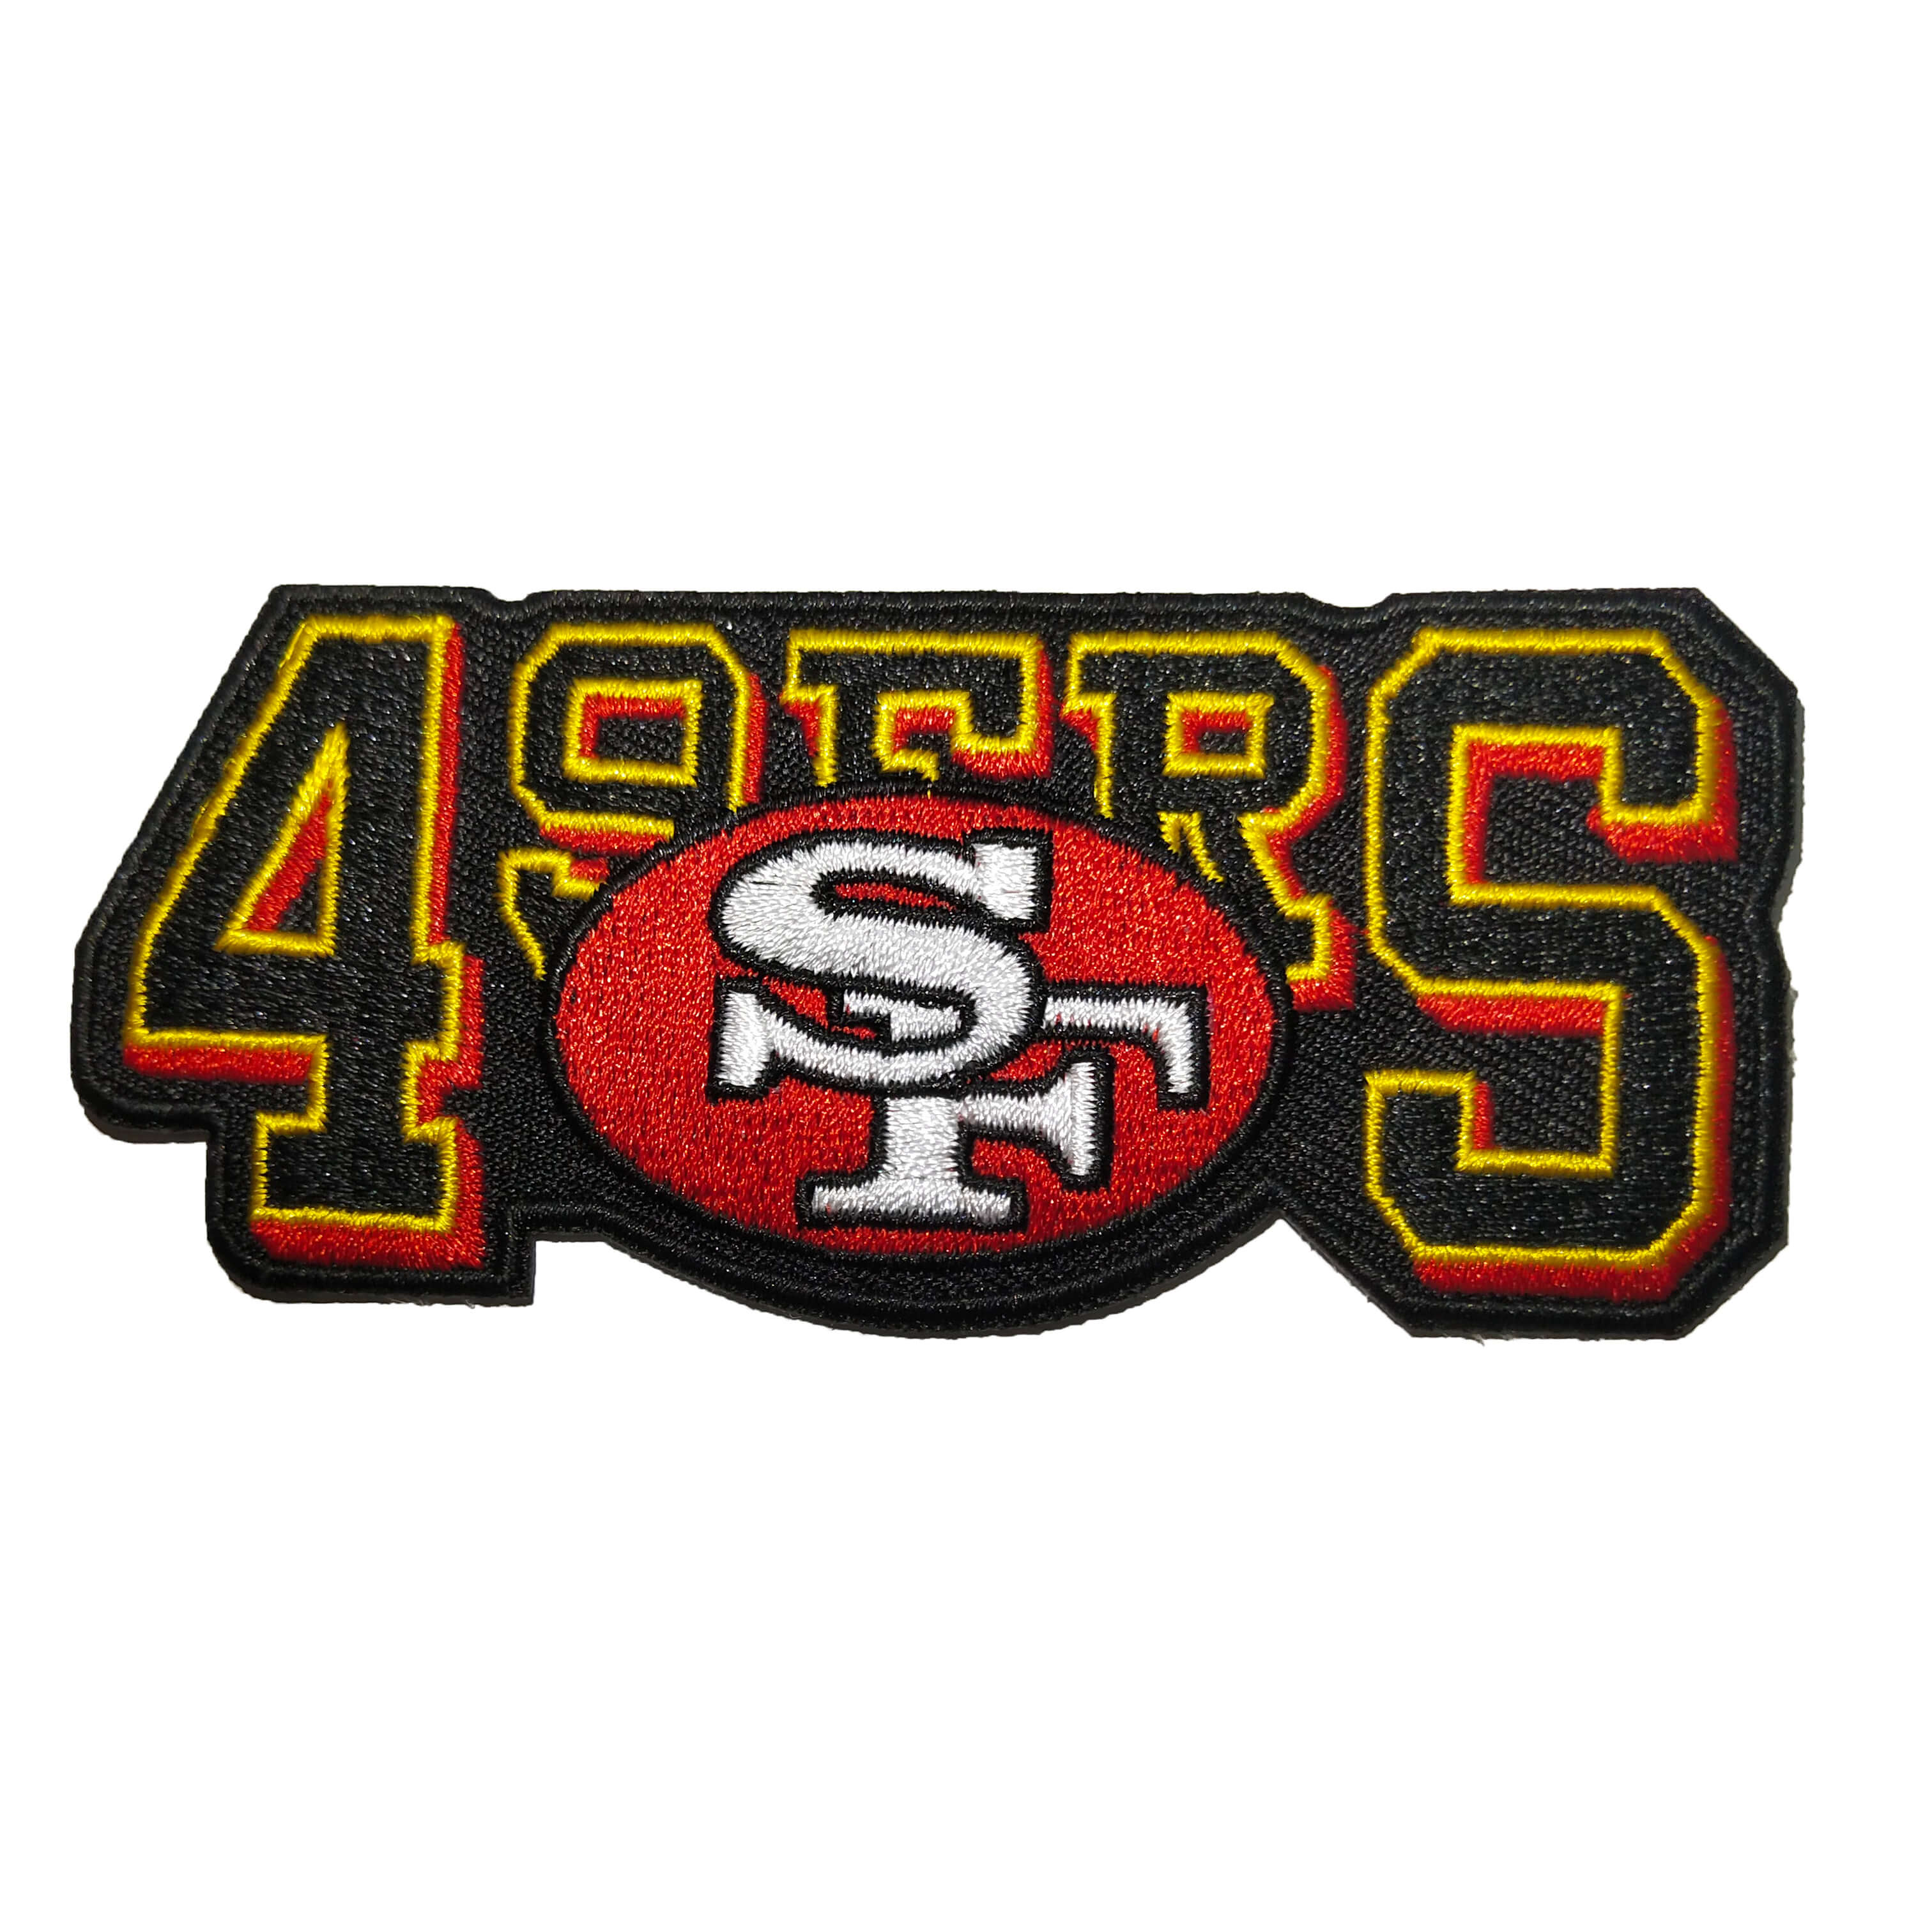 San Francisco 49ERS embroidered patch